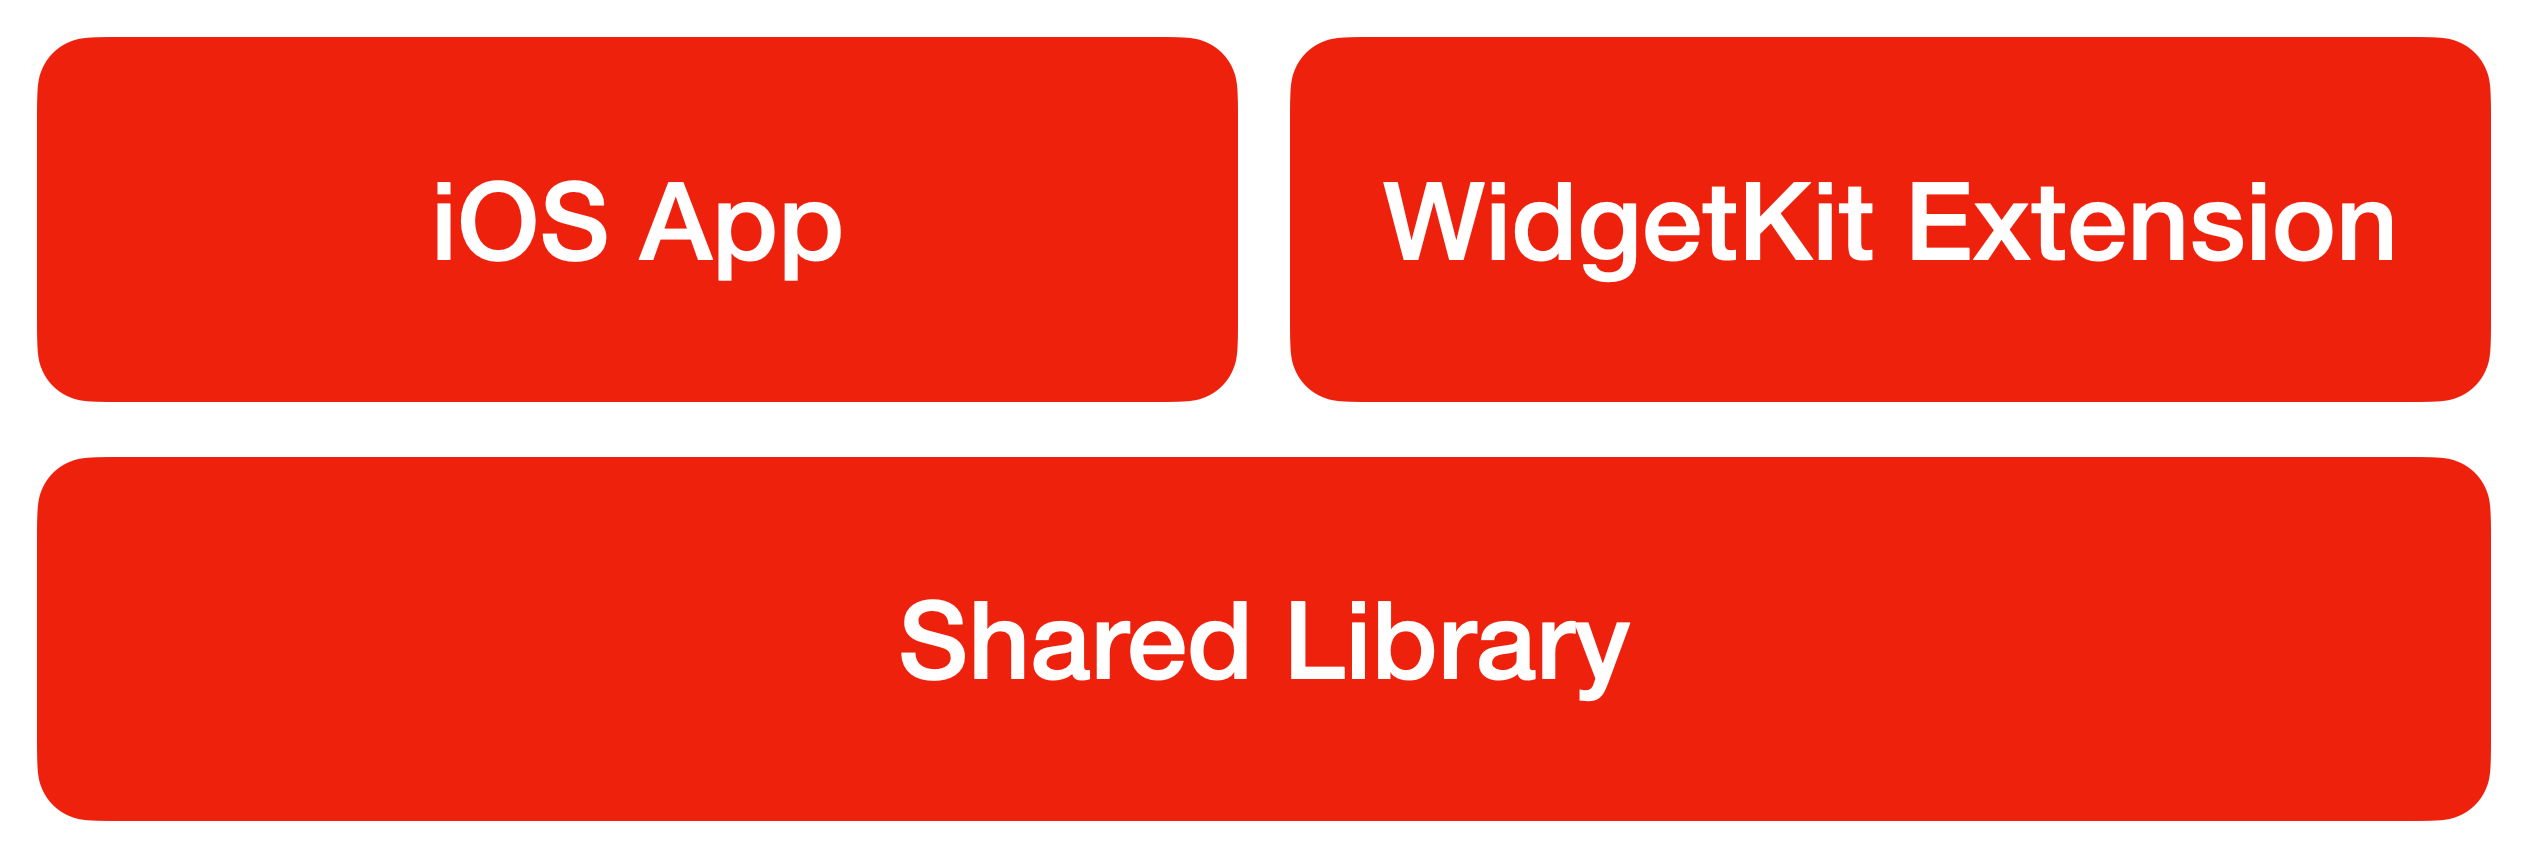 Architecture diagram of London Underground app. Top row is two boxes: iOS app and WidgetKit extension. The bottom row is a single box: Shared Library.